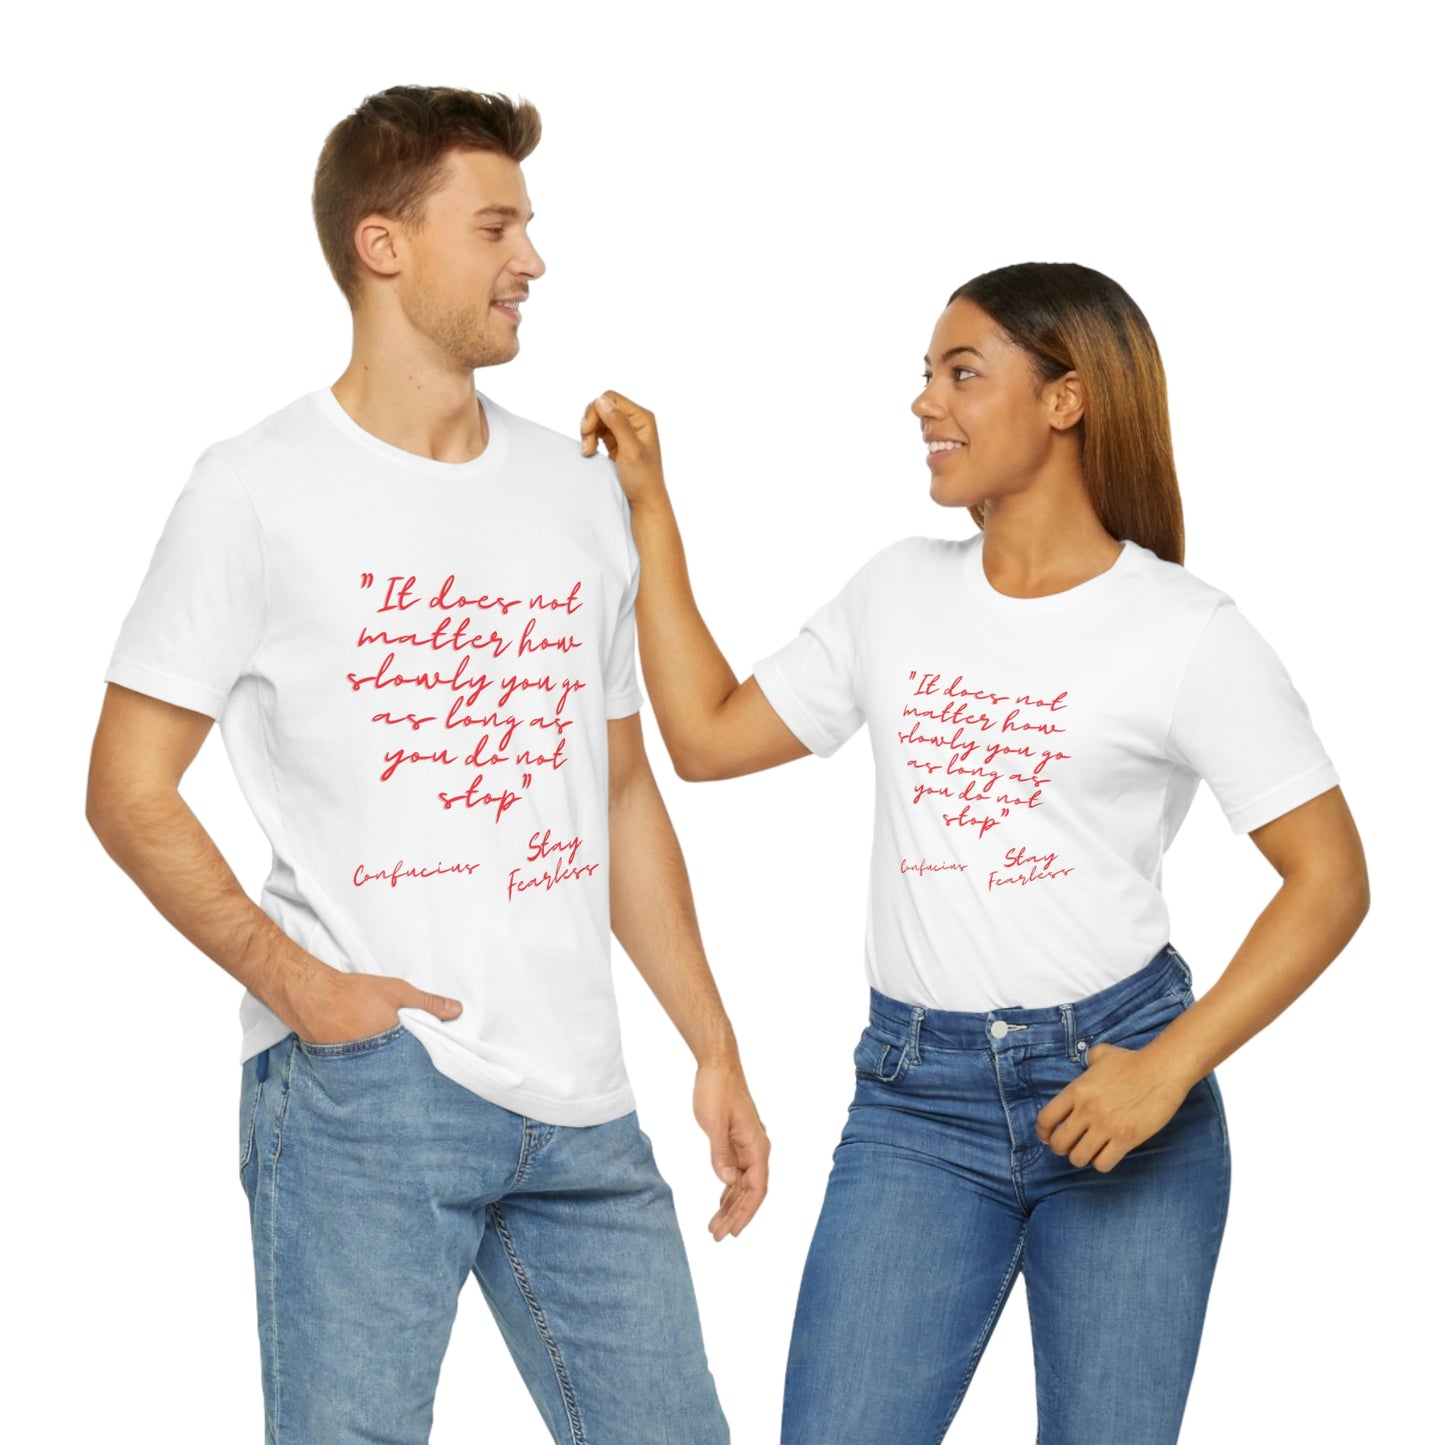 A Great Tee Inspire with Confidence: Men and Women's Confucius Jersey Tee